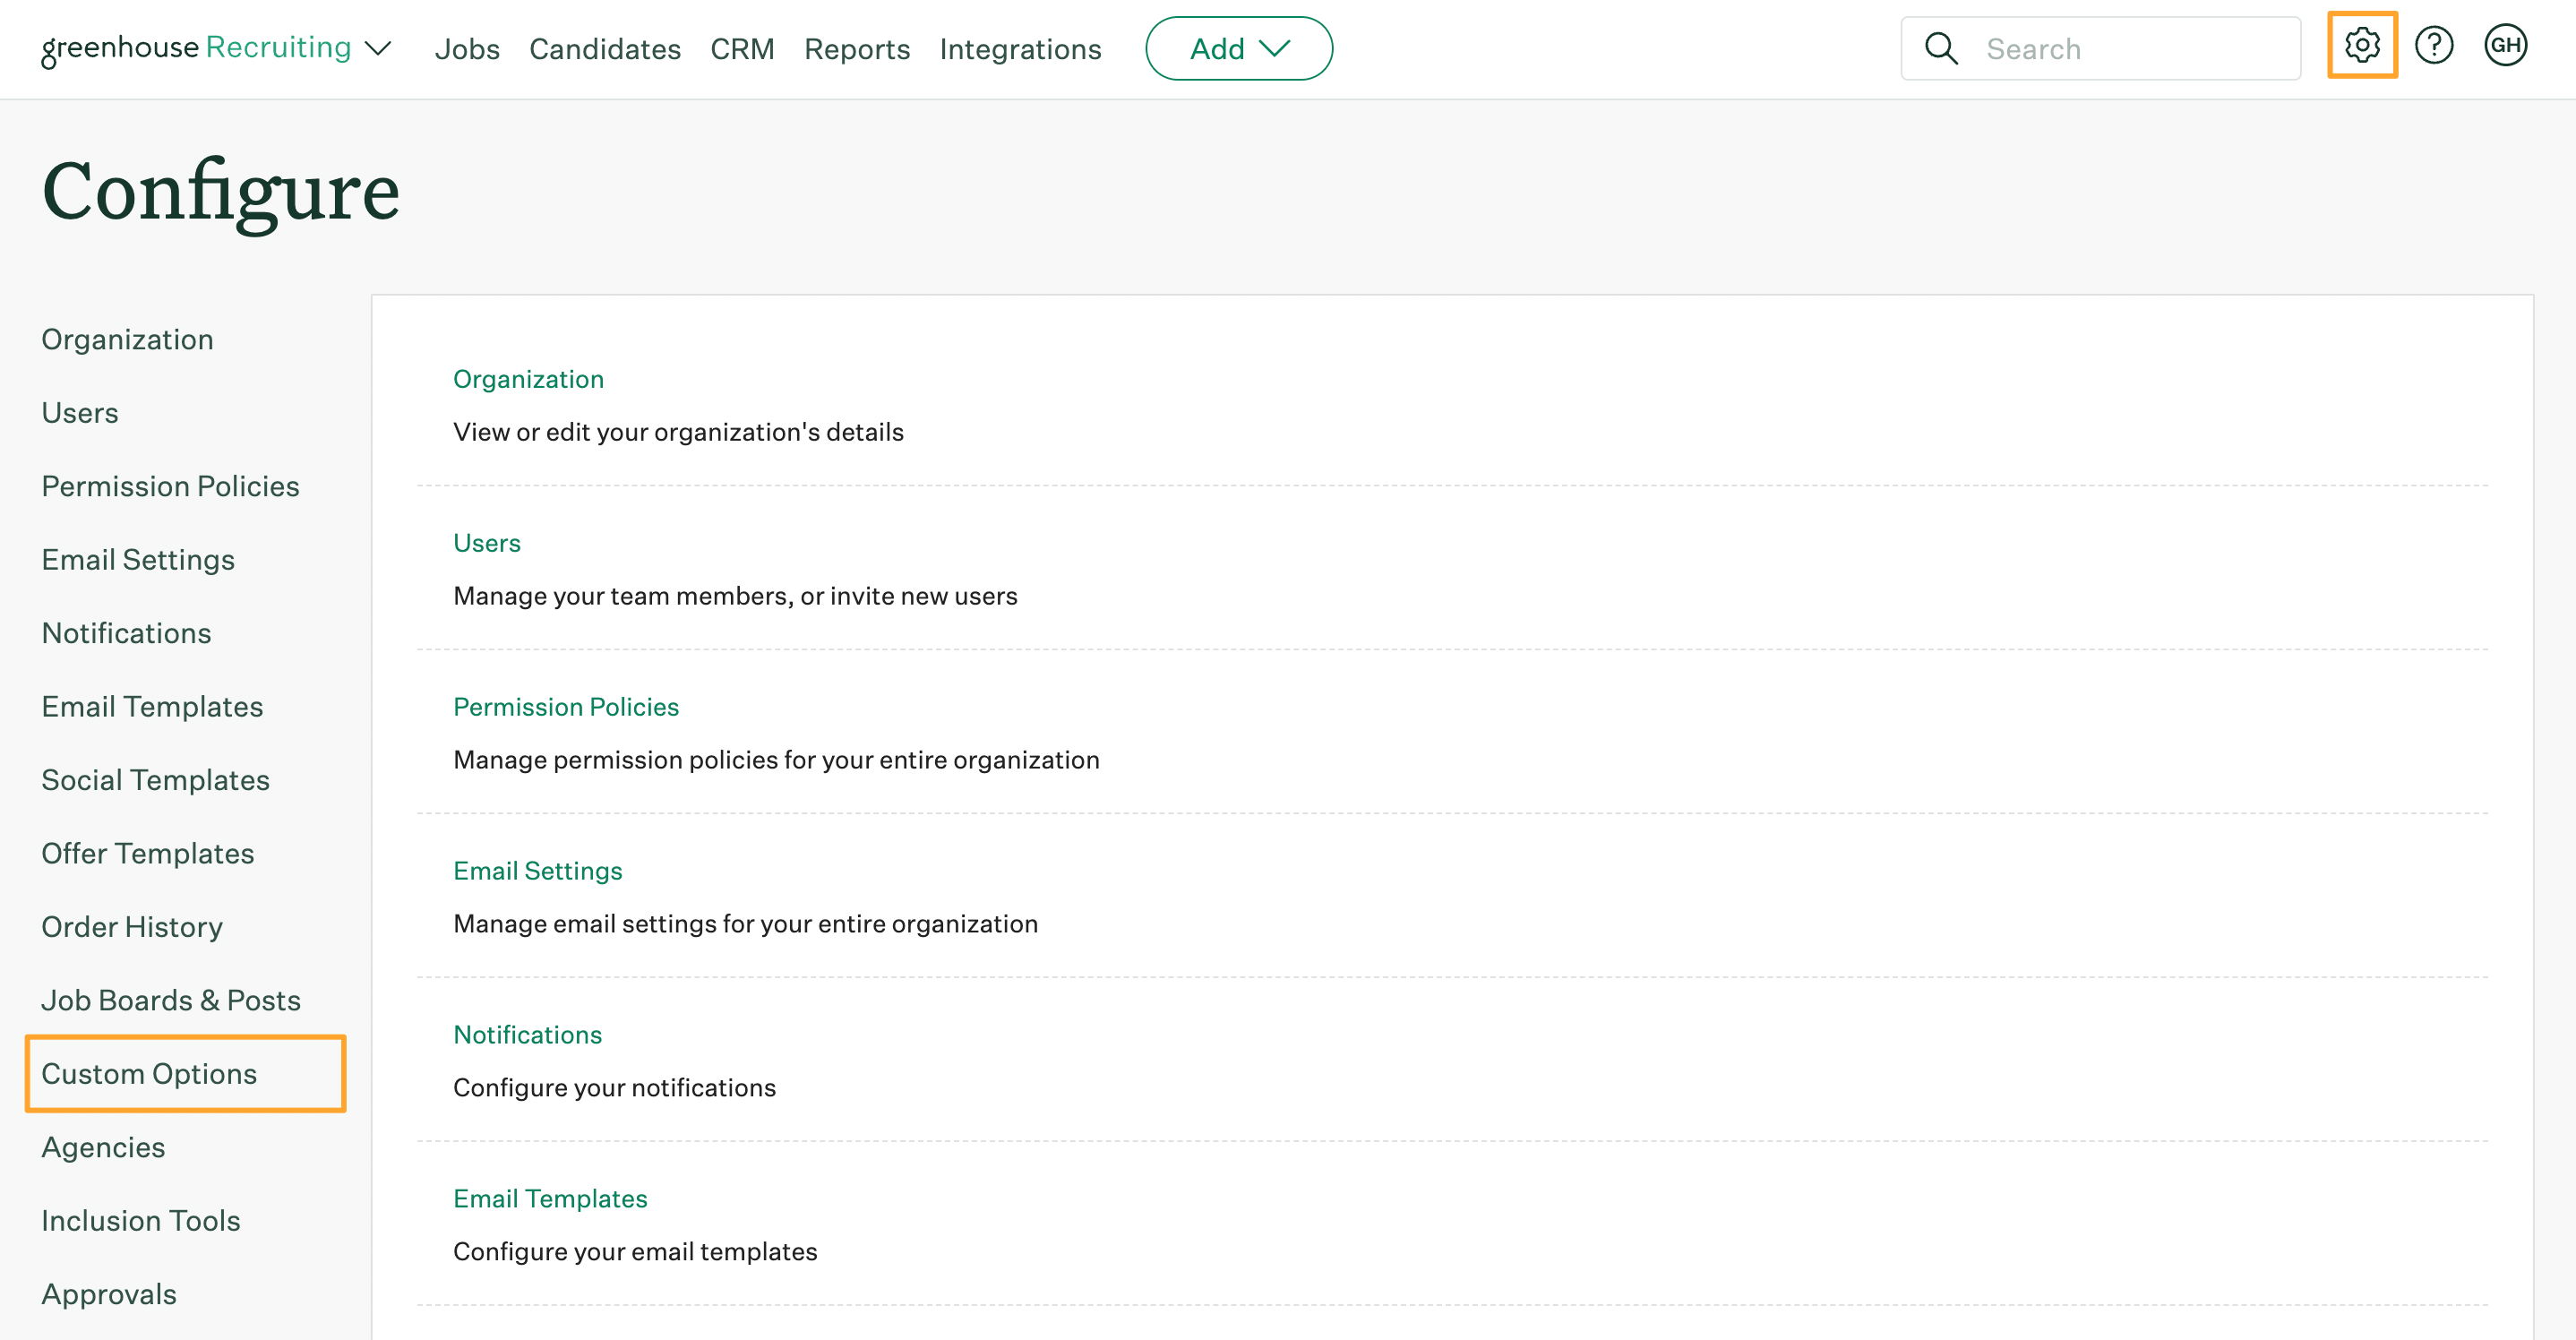 Configure page in Greenhouse Recruiting with Configure button and Custom Options button highlighted